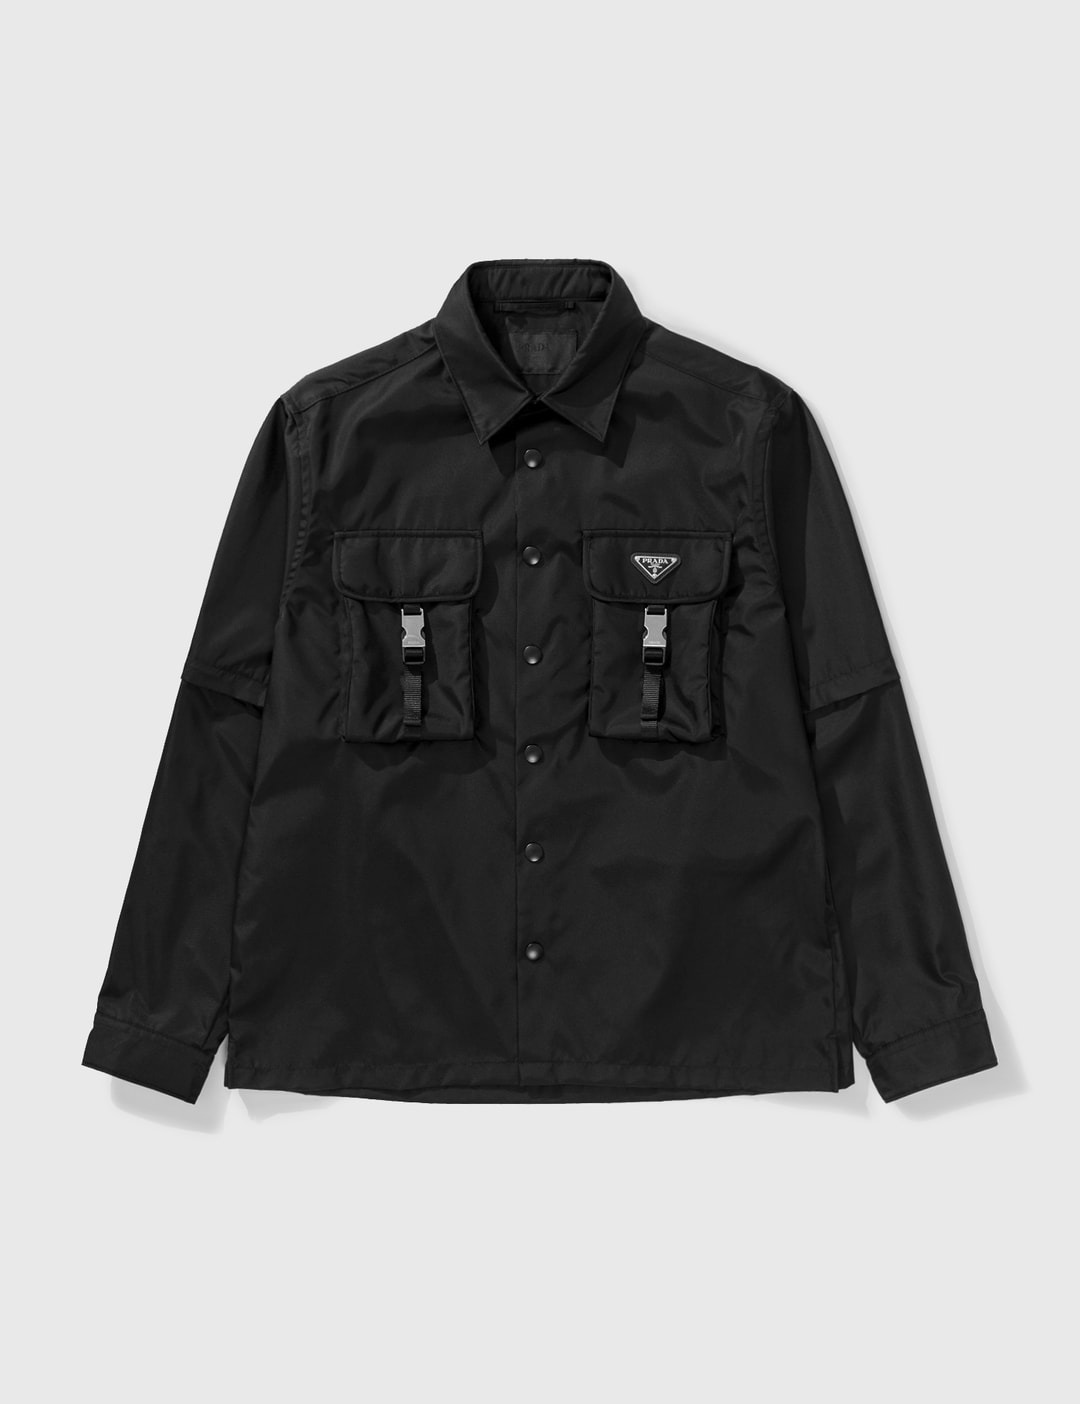 Any advice where to get the best rep of Prada shirt on pic (nylon